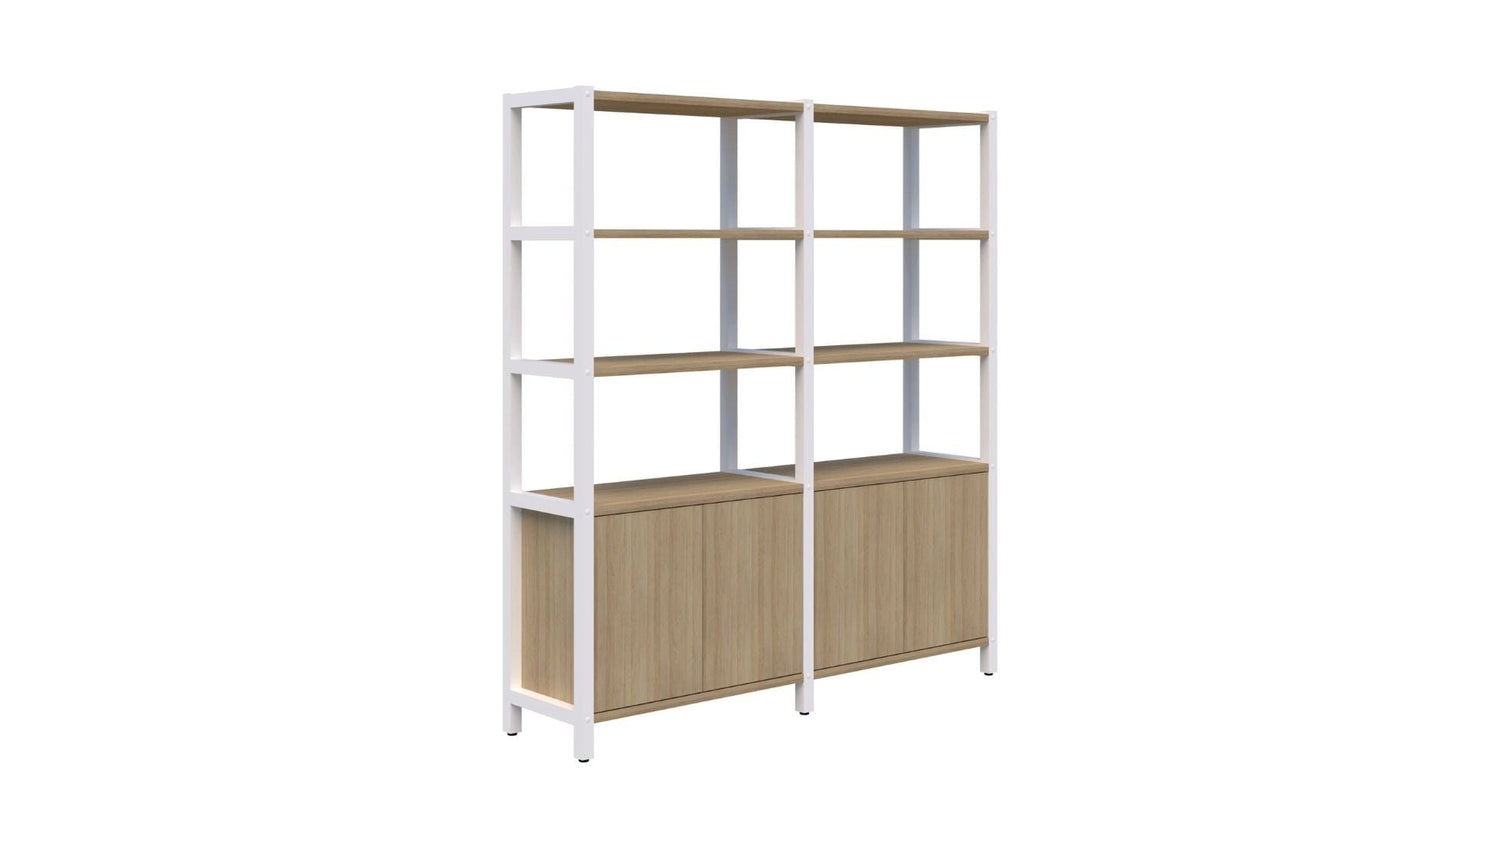 Filing and Storage Open Display Wall - 5 Tier Grid 40 Range